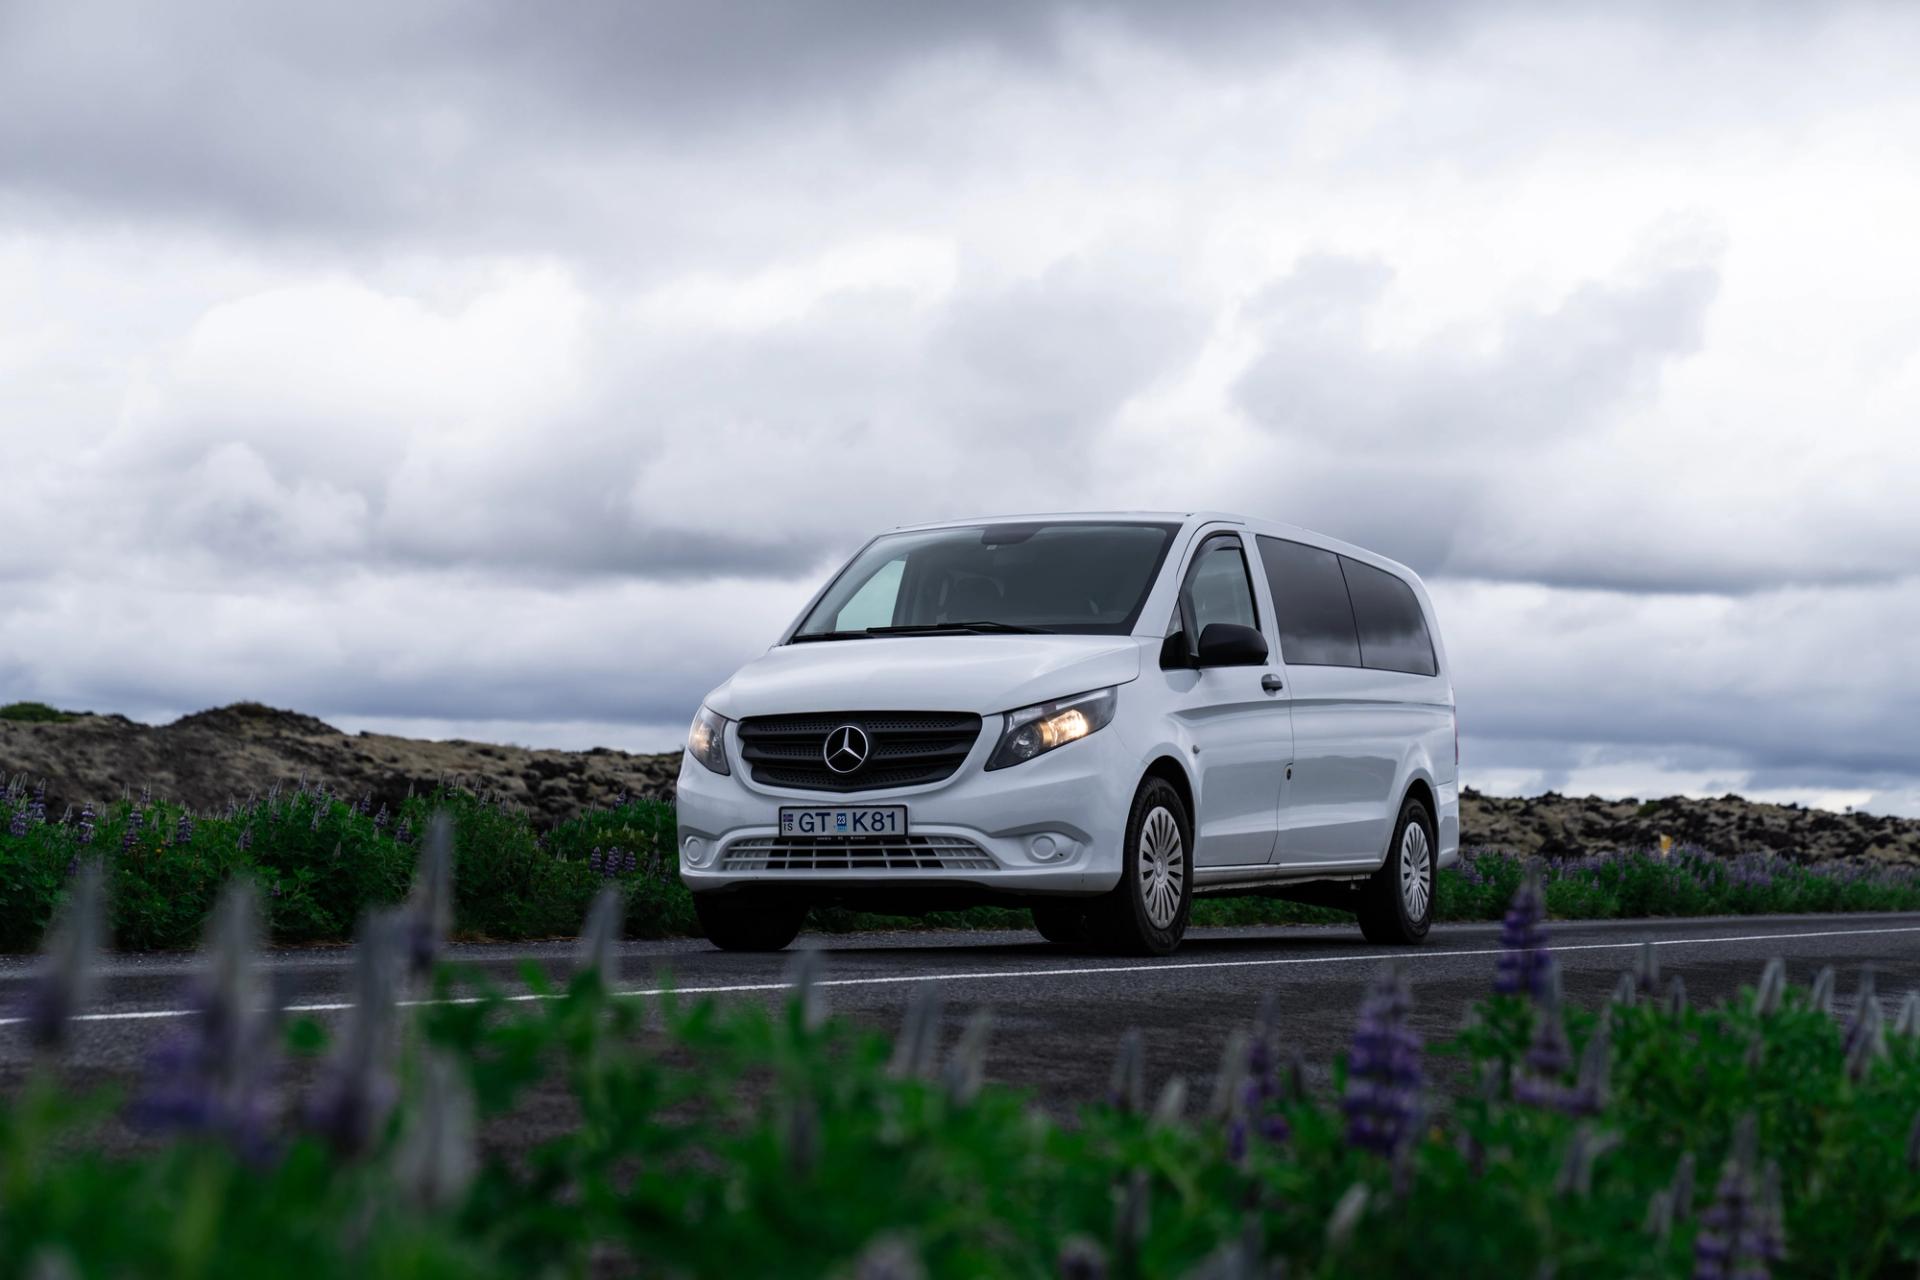 Mercedes-Benz Vito rental car in the stunning landscapes of Iceland.